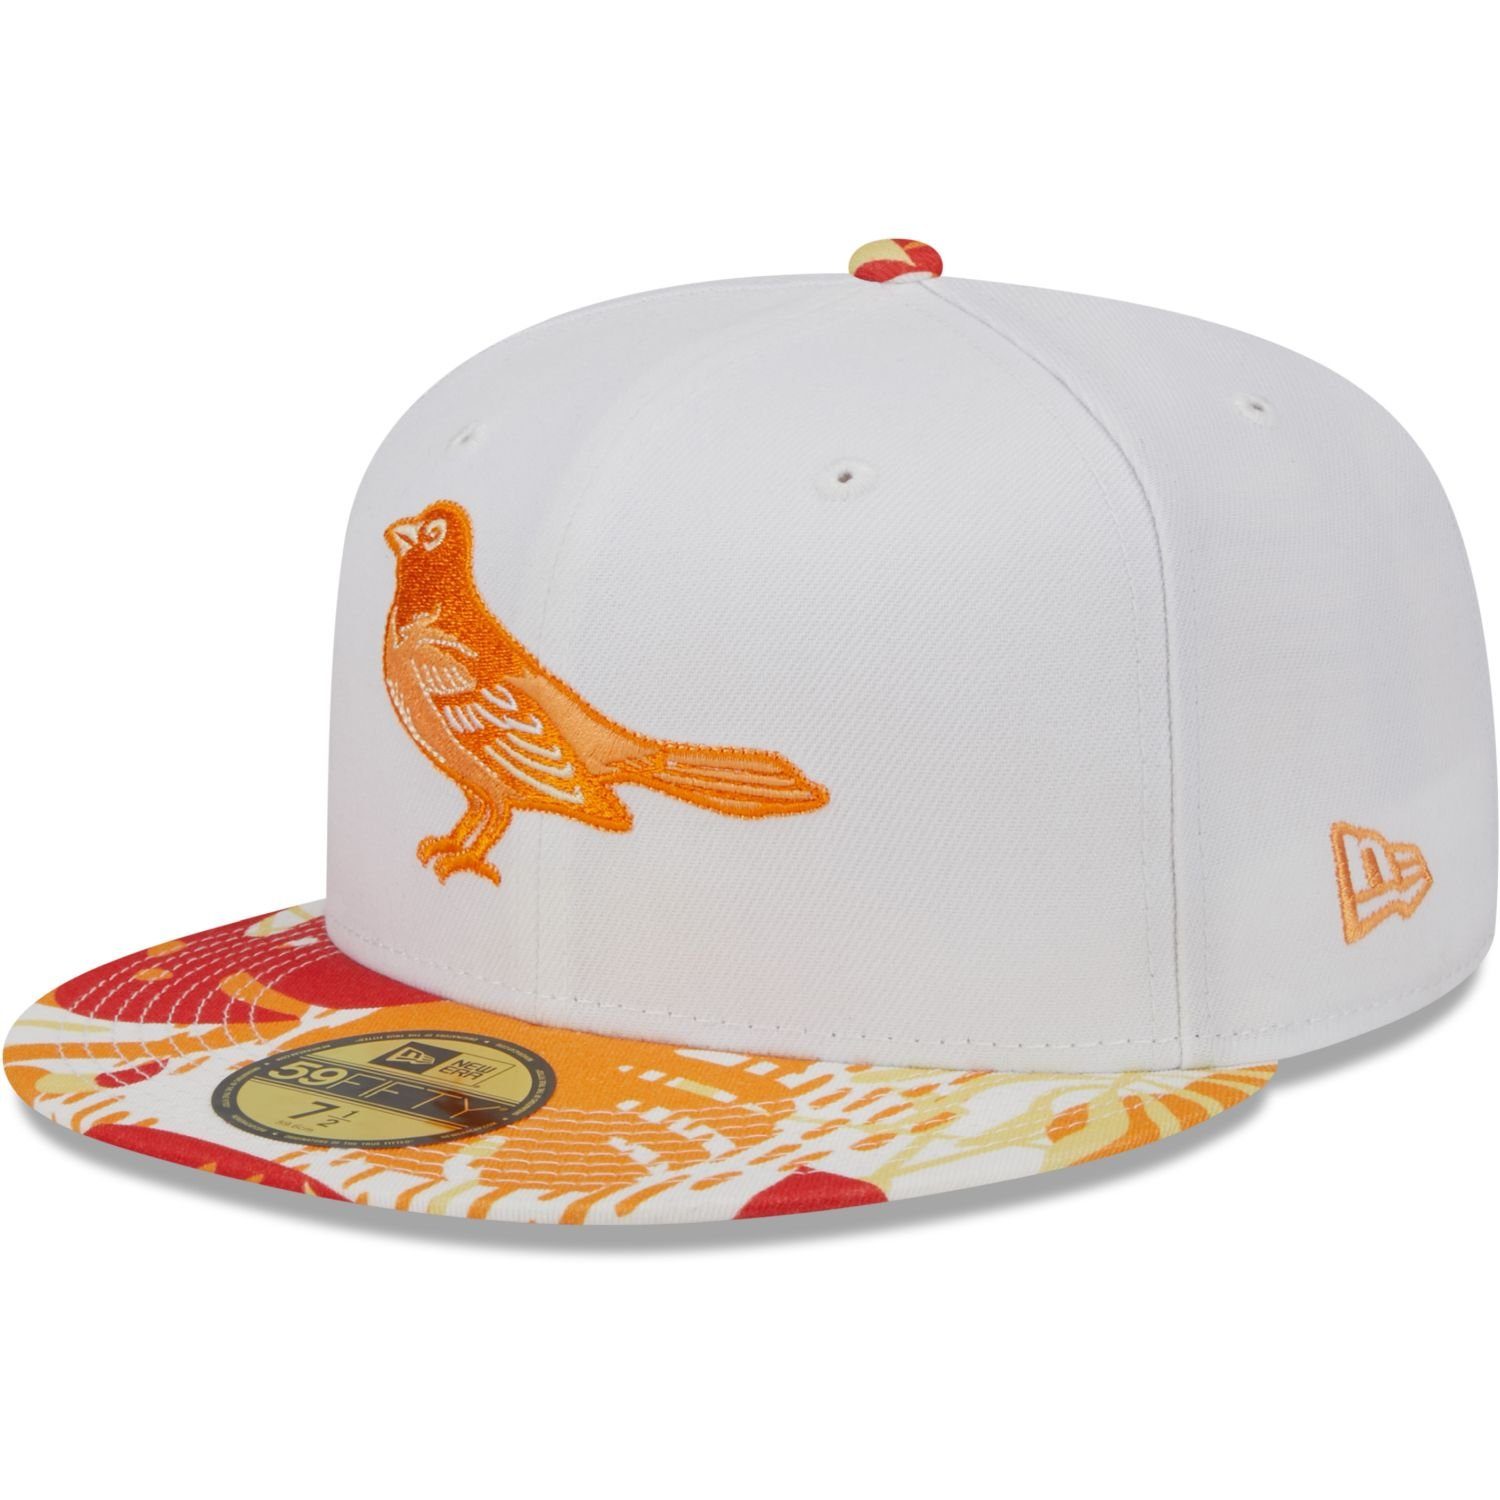 New Era Fitted Cap 59Fifty Baltimore Orioles floral